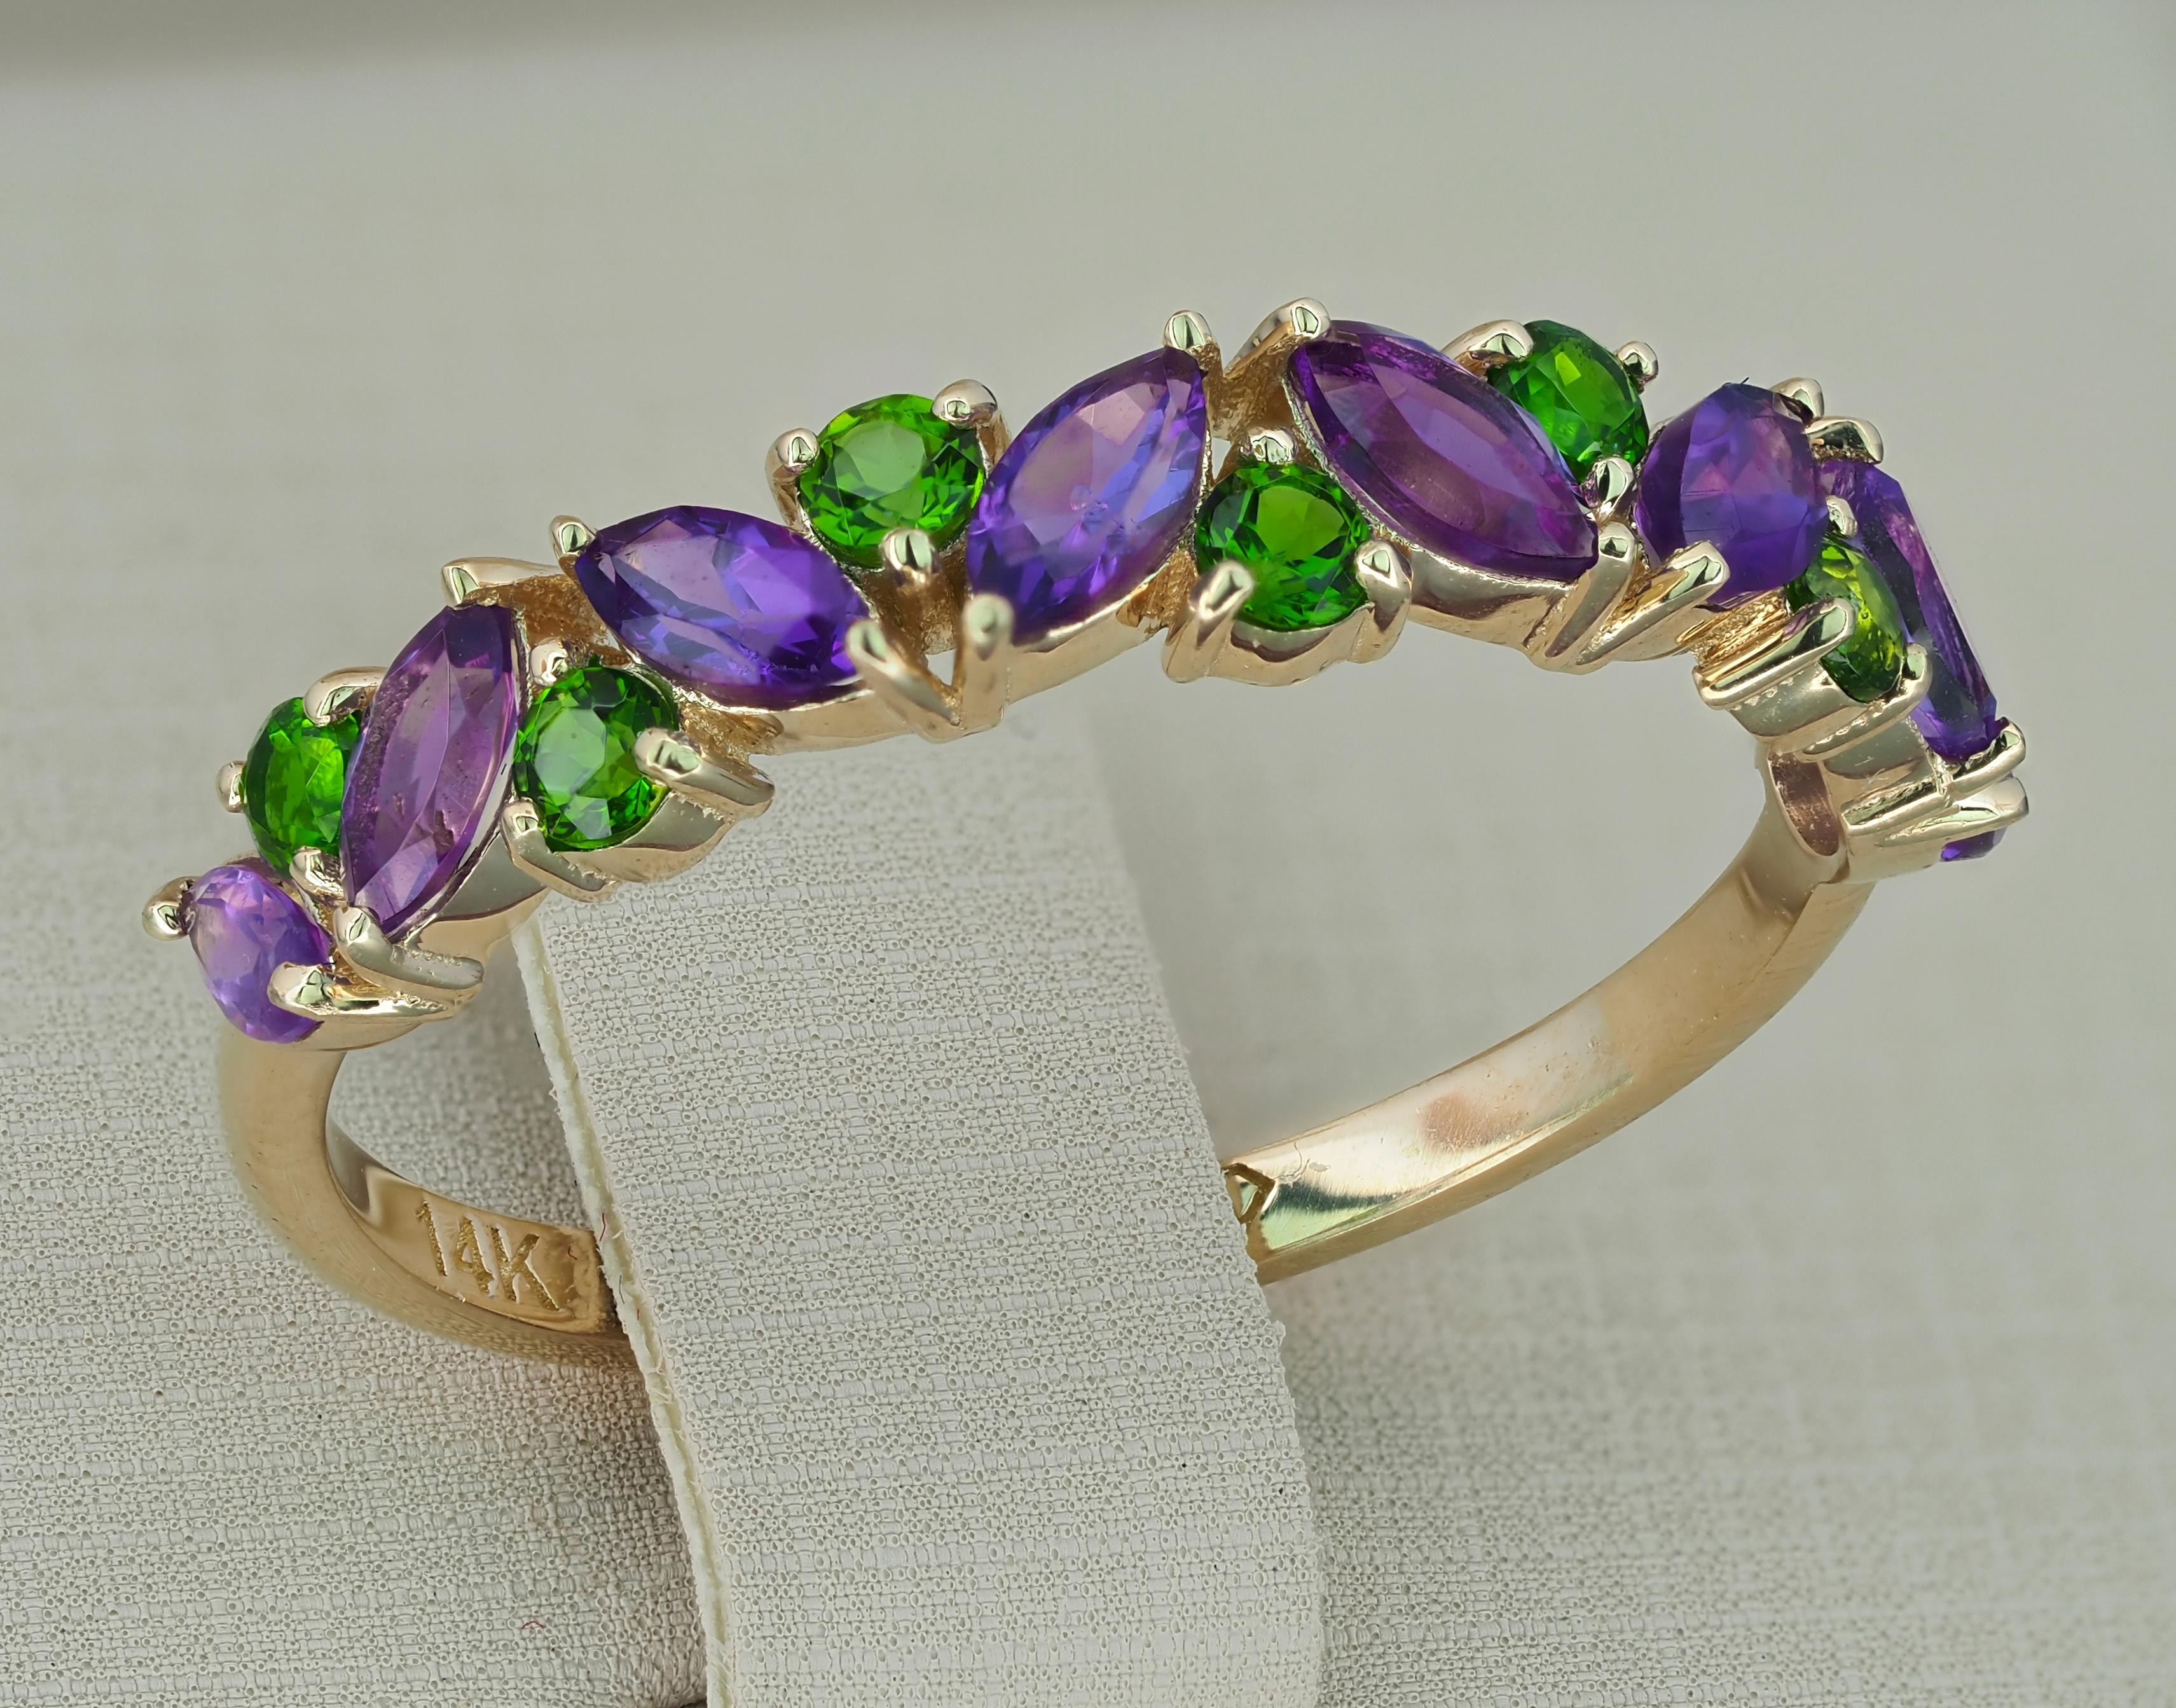 For Sale:  14k Gold Half Eternity Ring with Natural Amethyst and Chrome Diopside 6